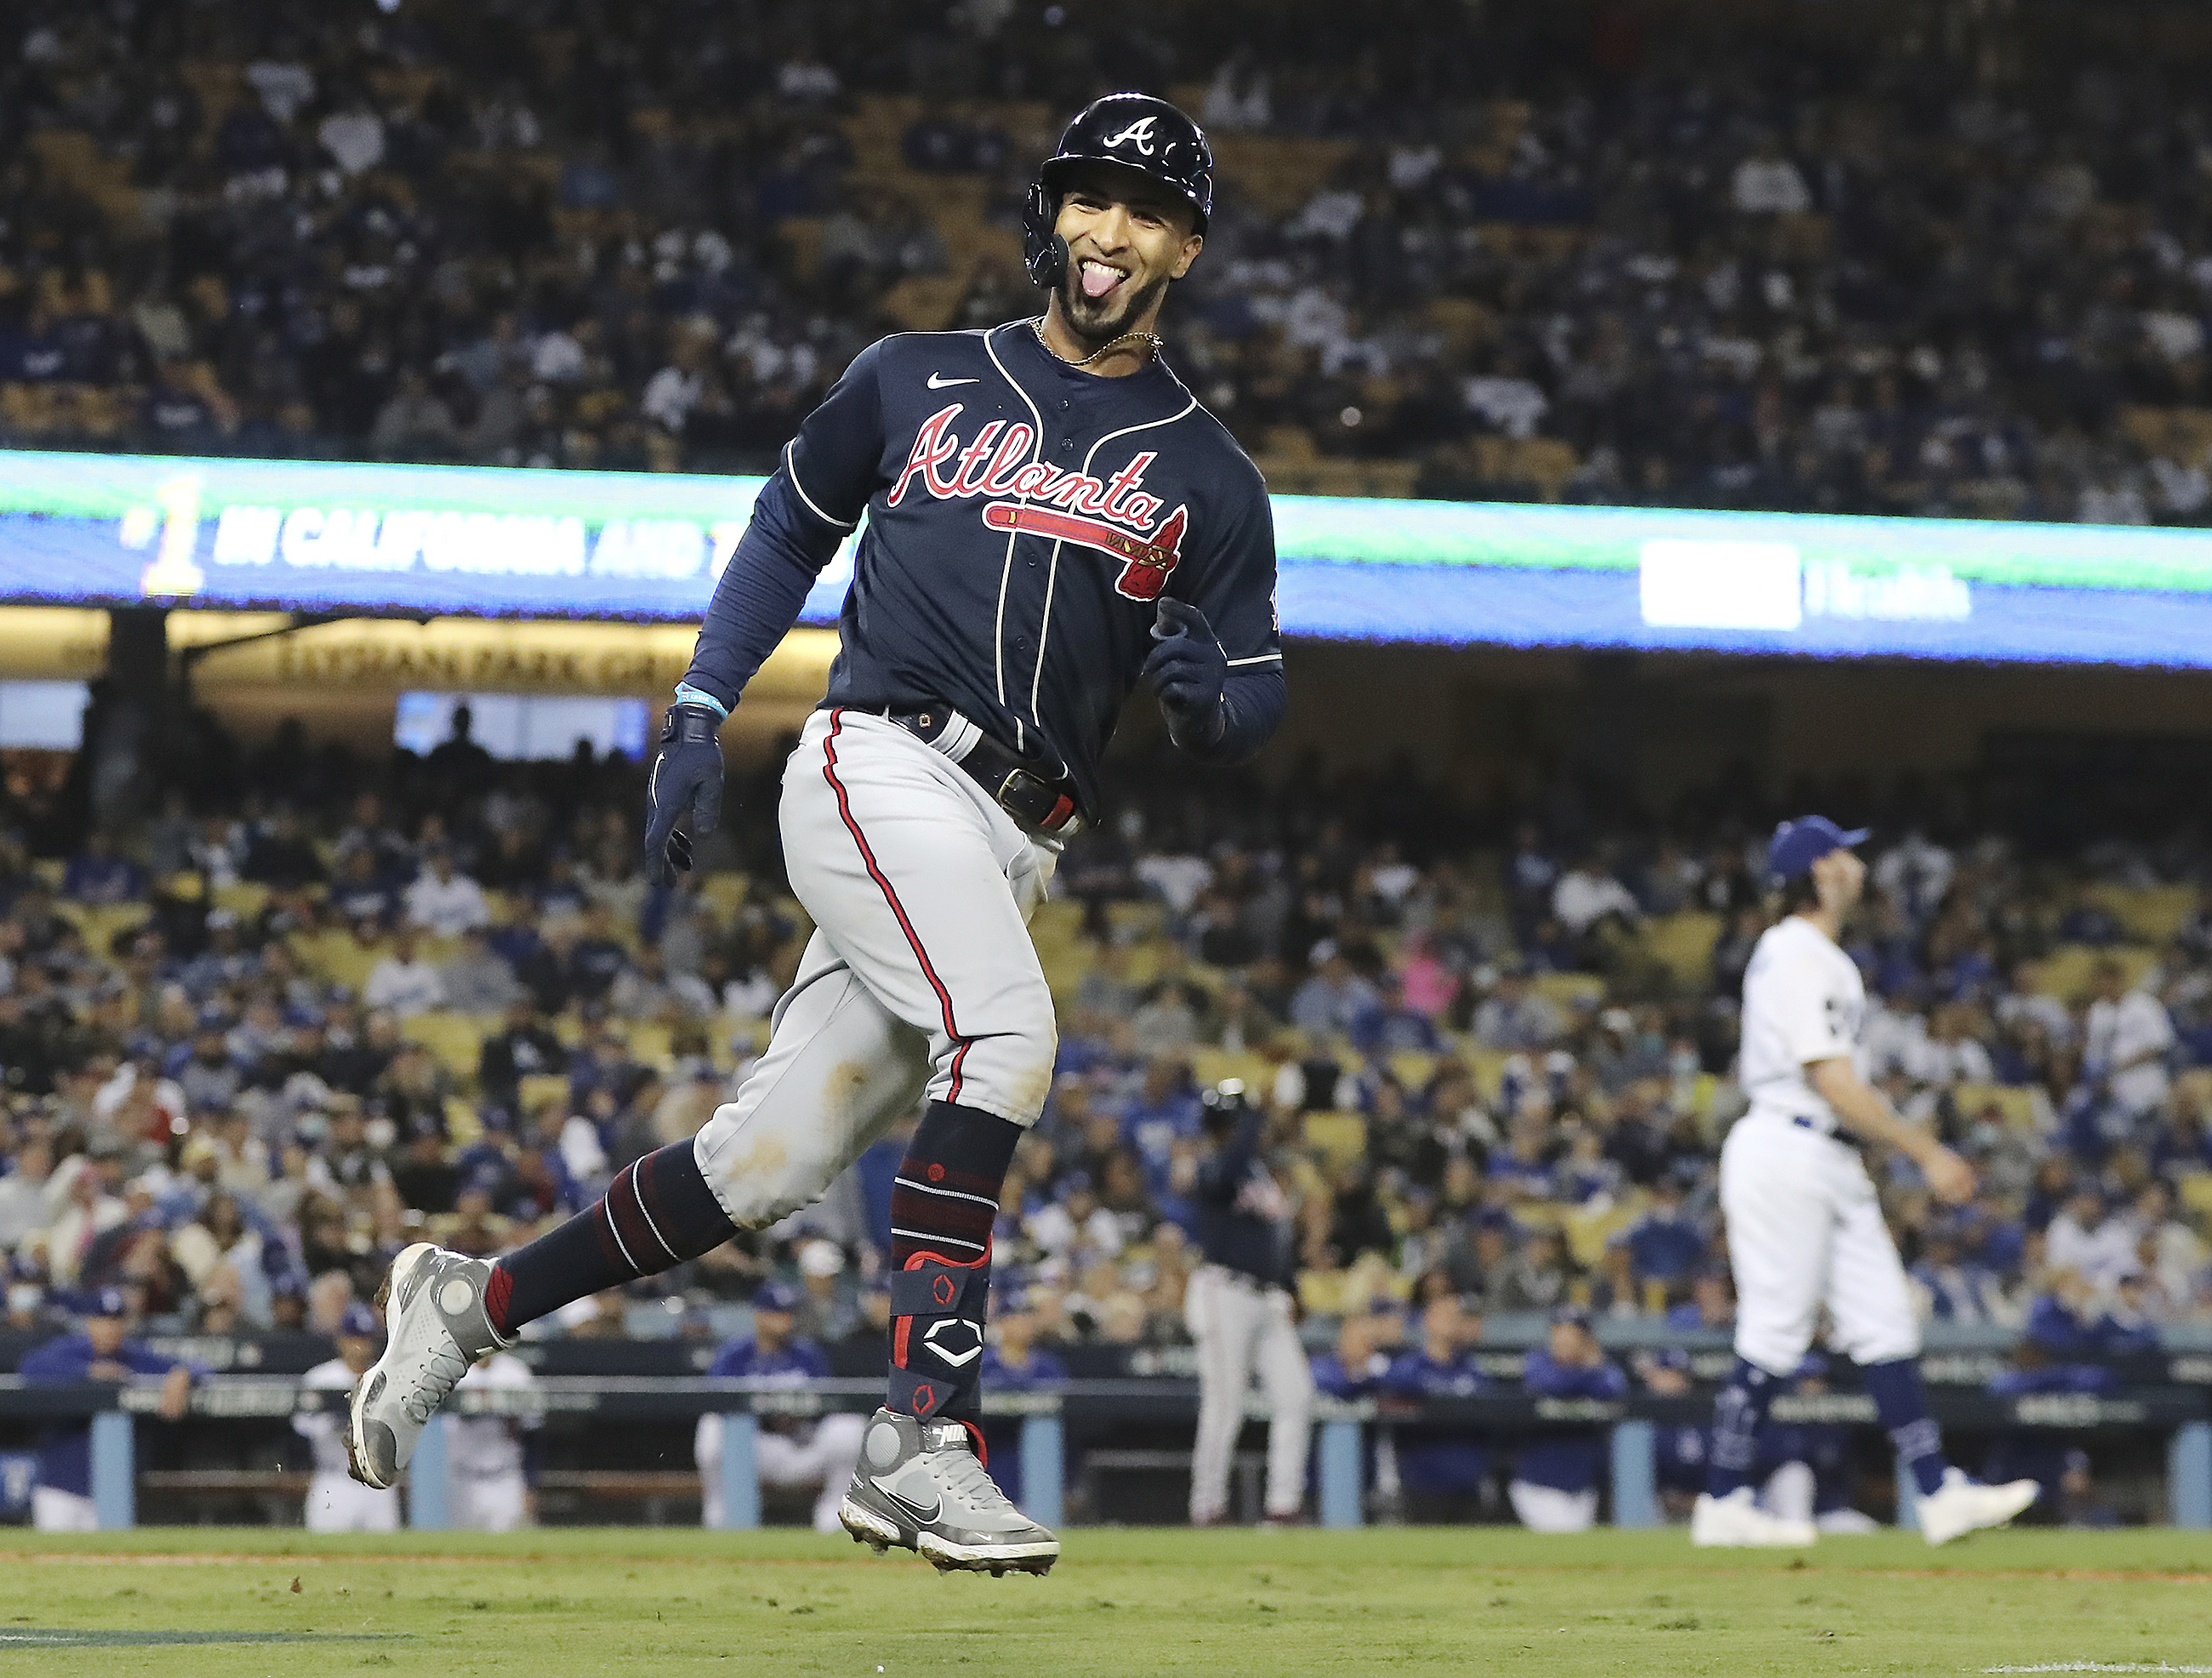 Cheaply acquired Eddie Rosario goes from Twins to Cleveland to